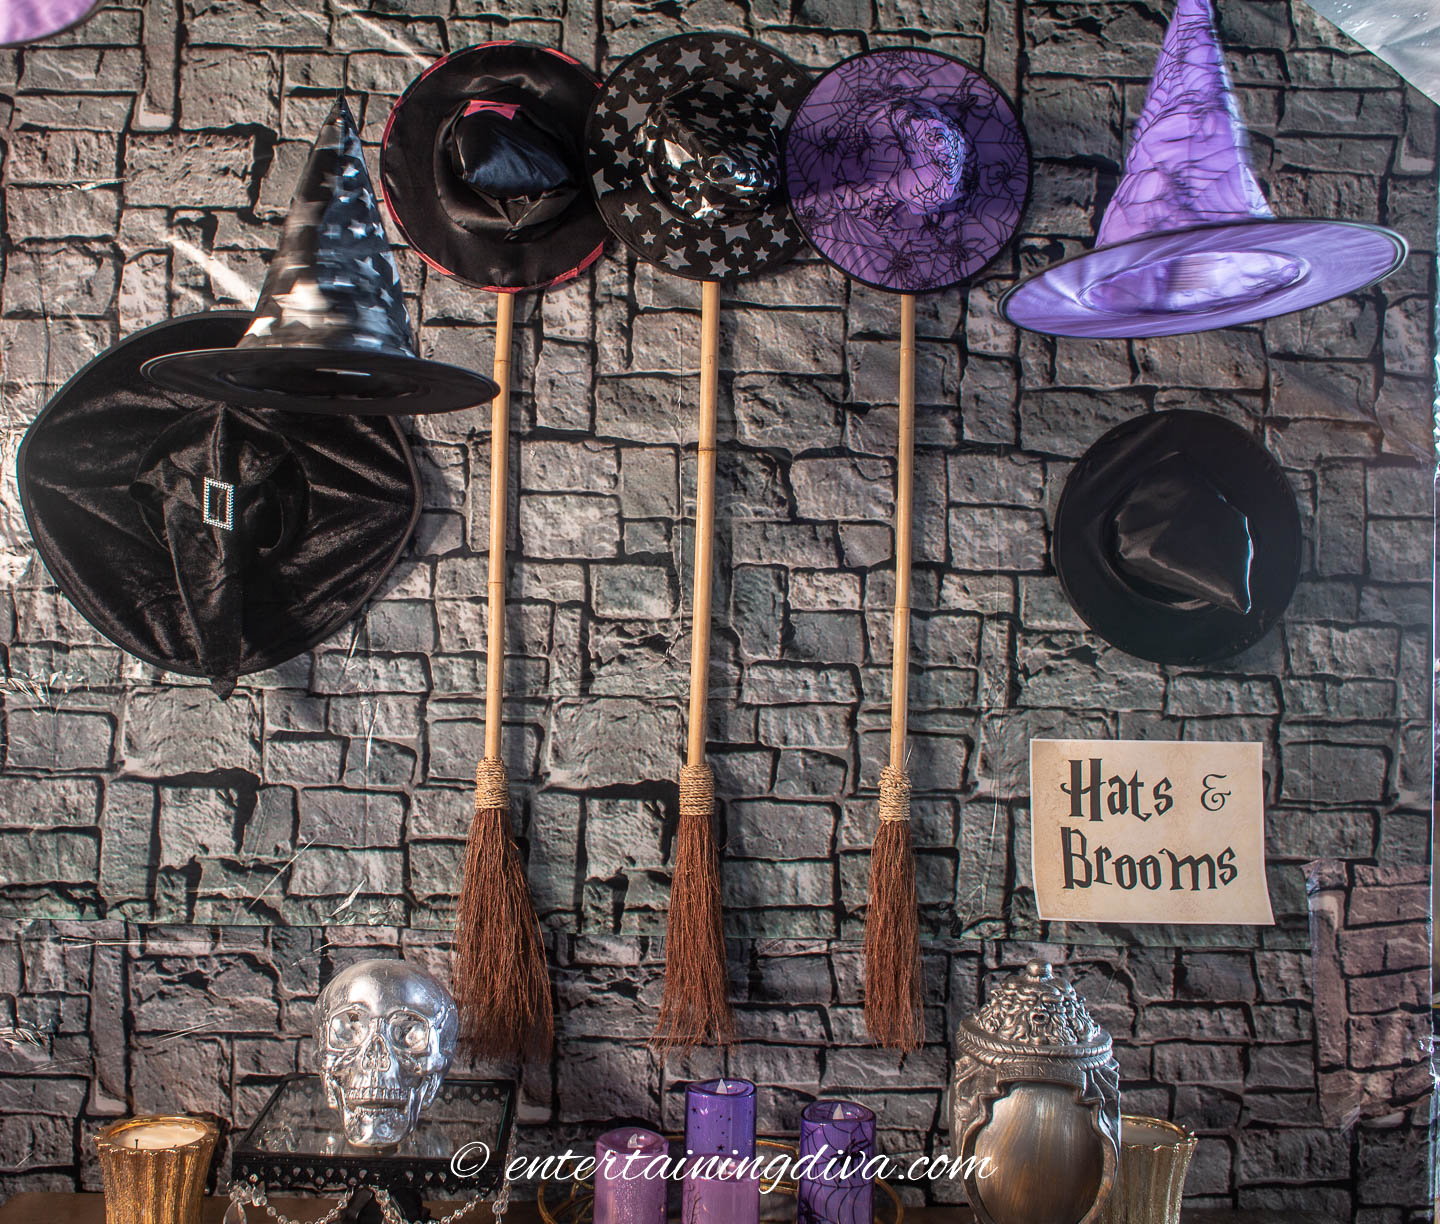 Watches hats and broomsticks hanging on the wall at a witches Halloween party